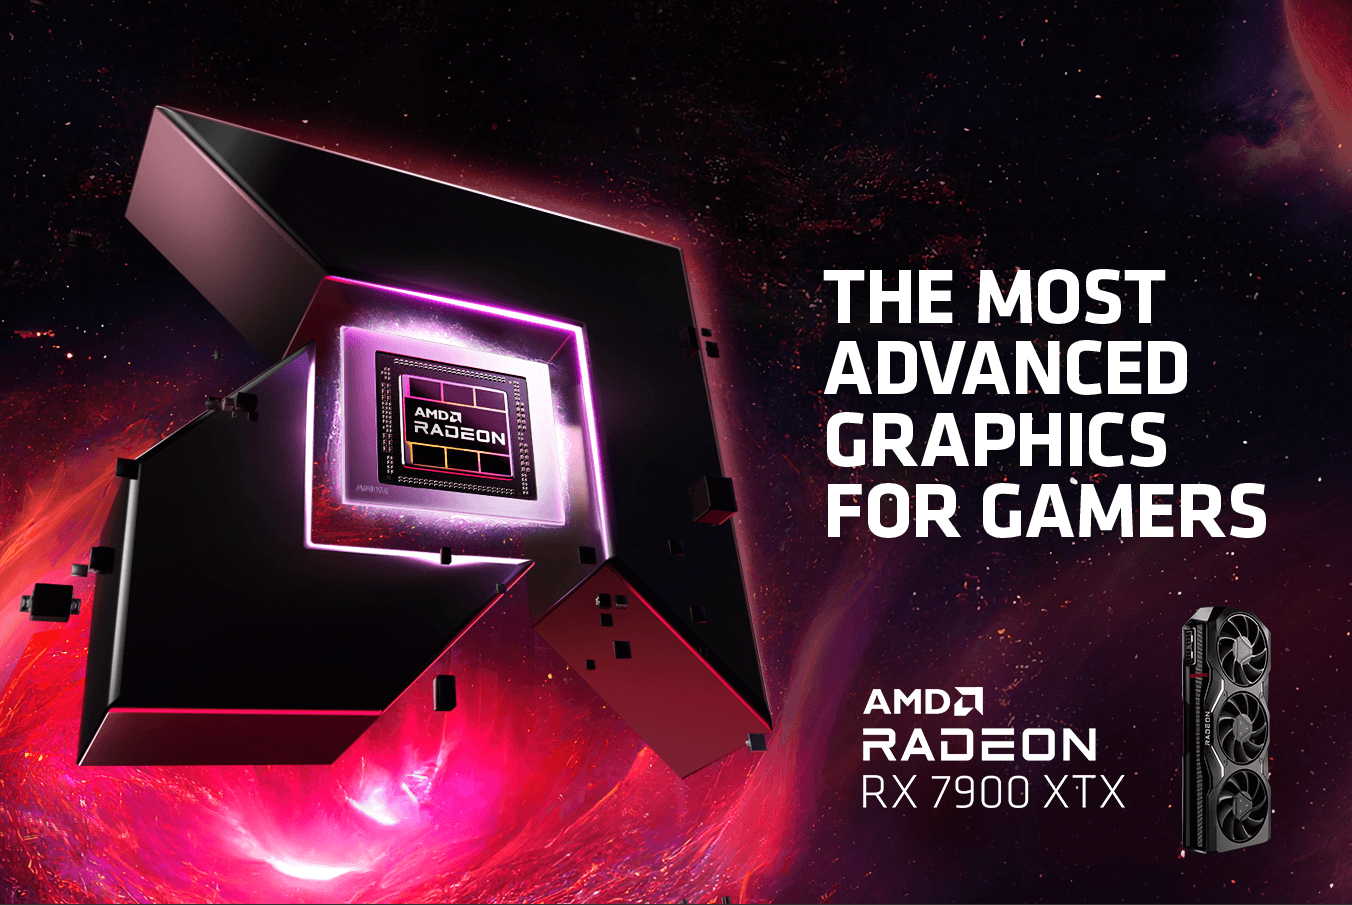 THE MOST ADVANCED GRAPHICS FOR GAMERS